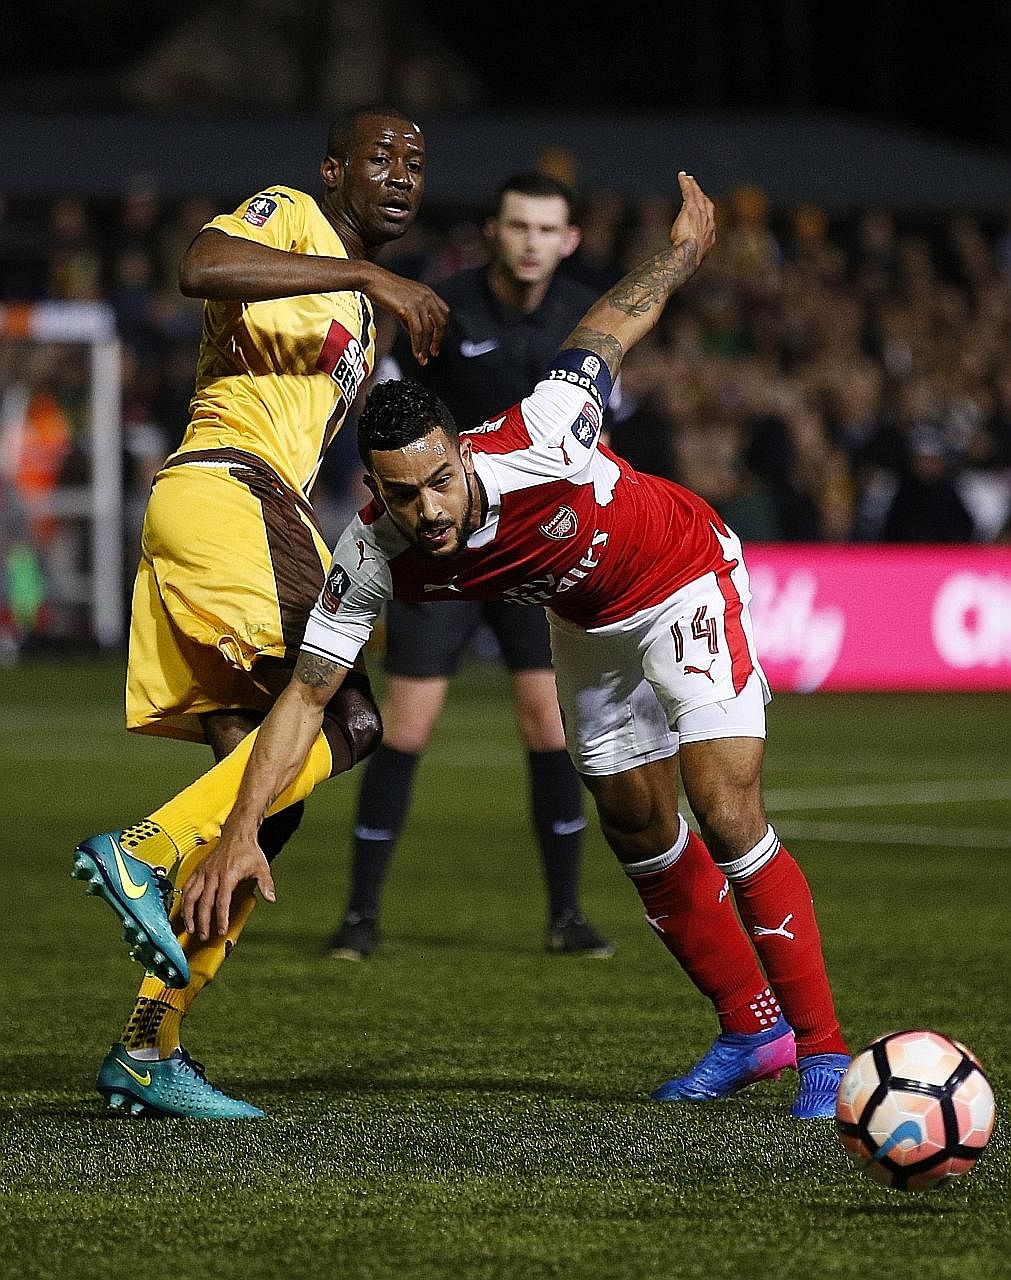 Arsenal forward Theo Walcott fighting with Sutton midfielder Bedsente Gomis for the ball. He scored his 100th goal for the Gunners when he netted in the 55th minute.